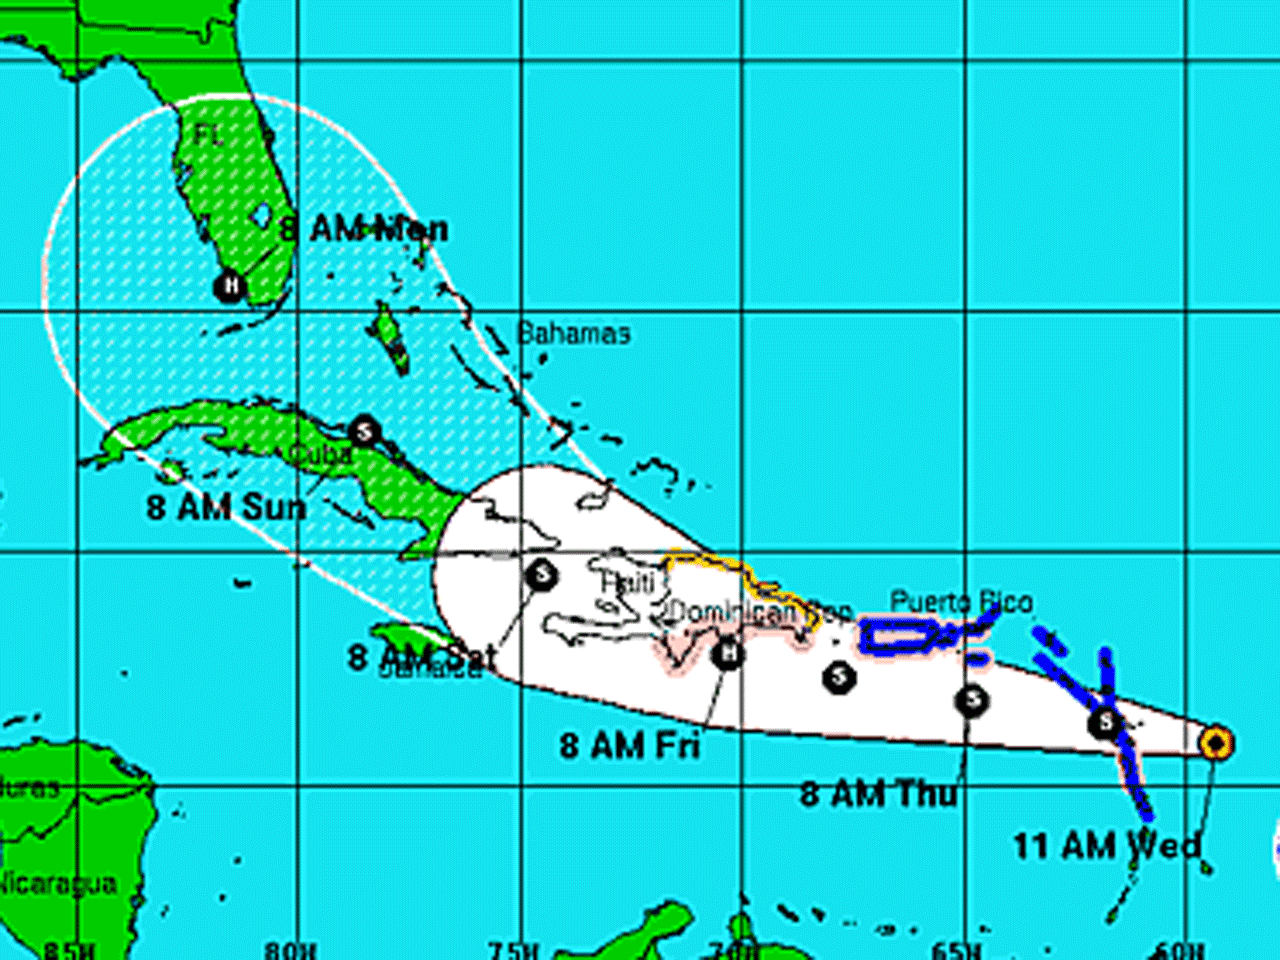 Projected path of Tropical Storm Isaac as of August 22, 2012 